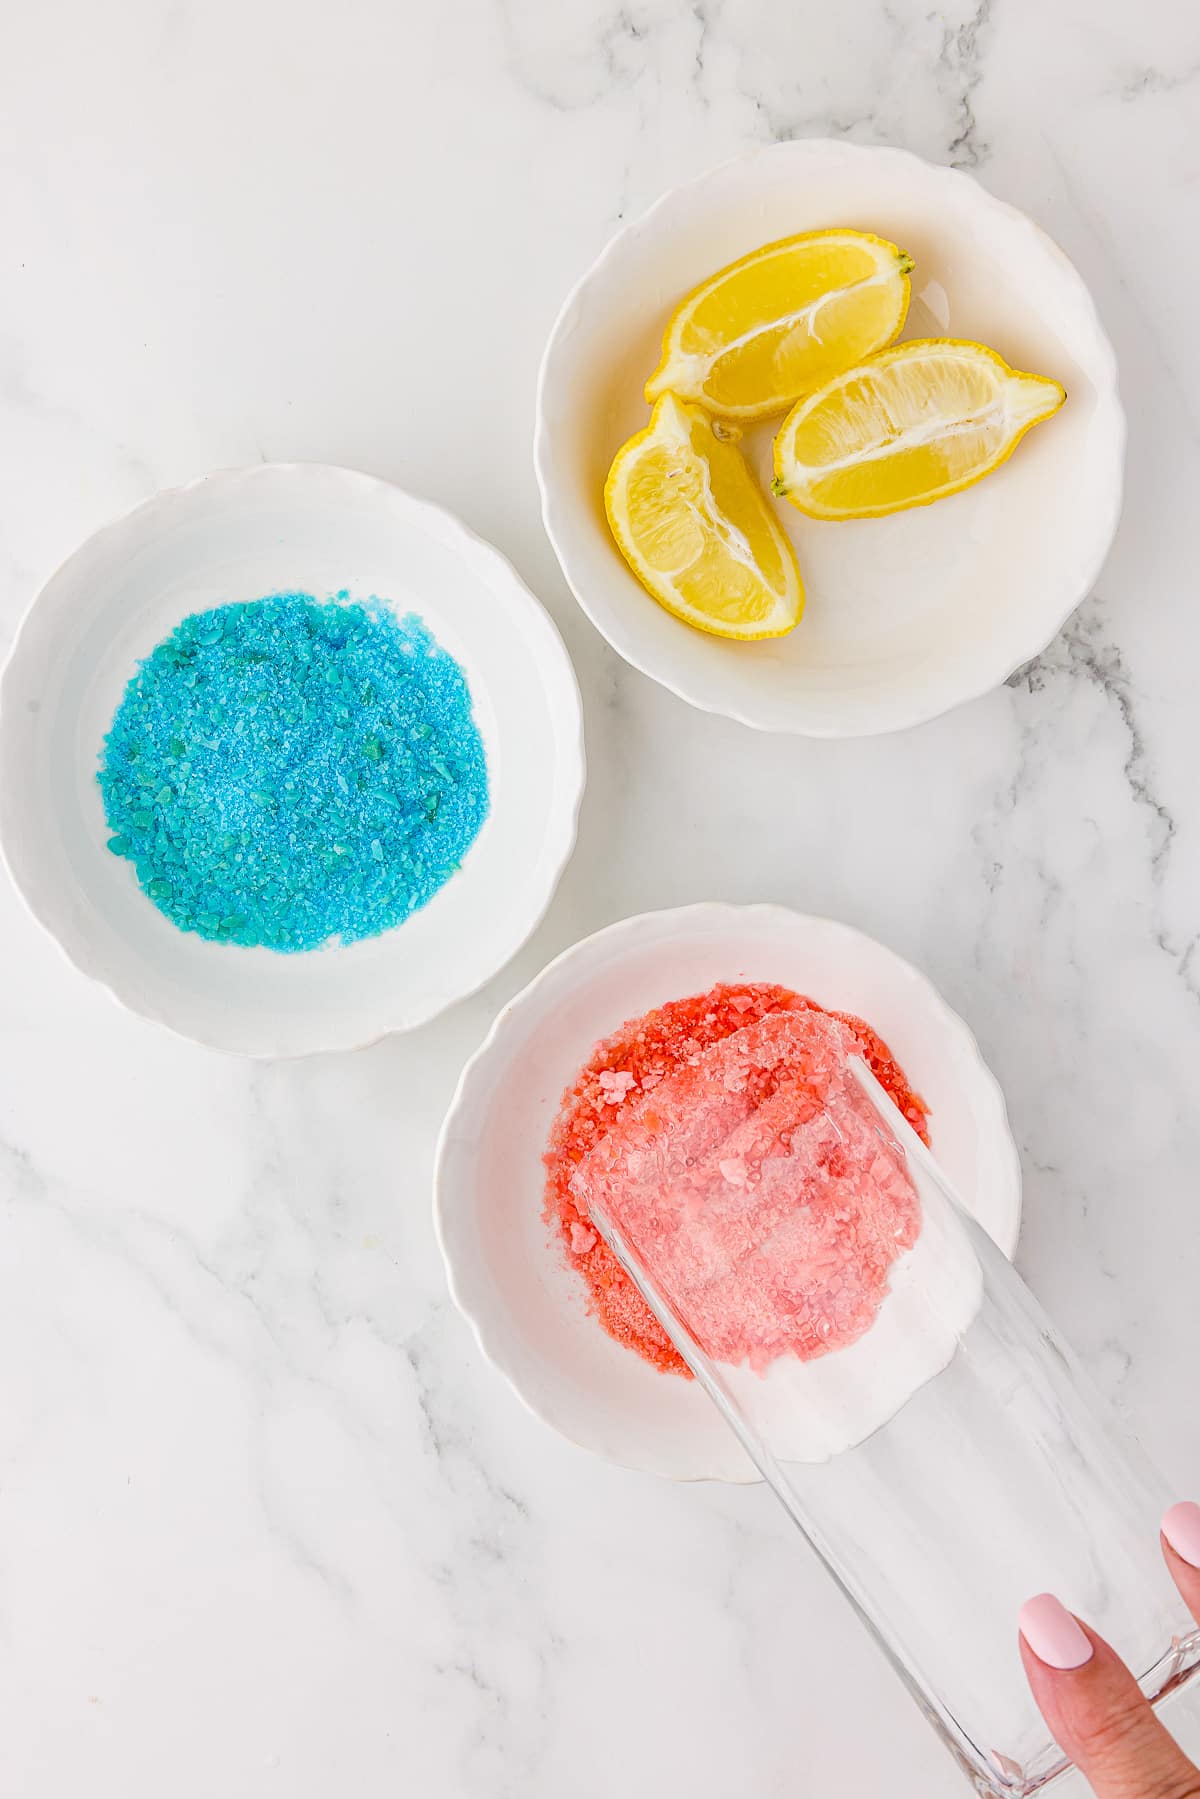 Dipping a tall square glass, the upper rim of which has been covered with lemon juice, into a small white bowl of red pop rock like candy. Also, a small, whtie bowl of blue pop rock candy and a small, white bowl of sliced lemon